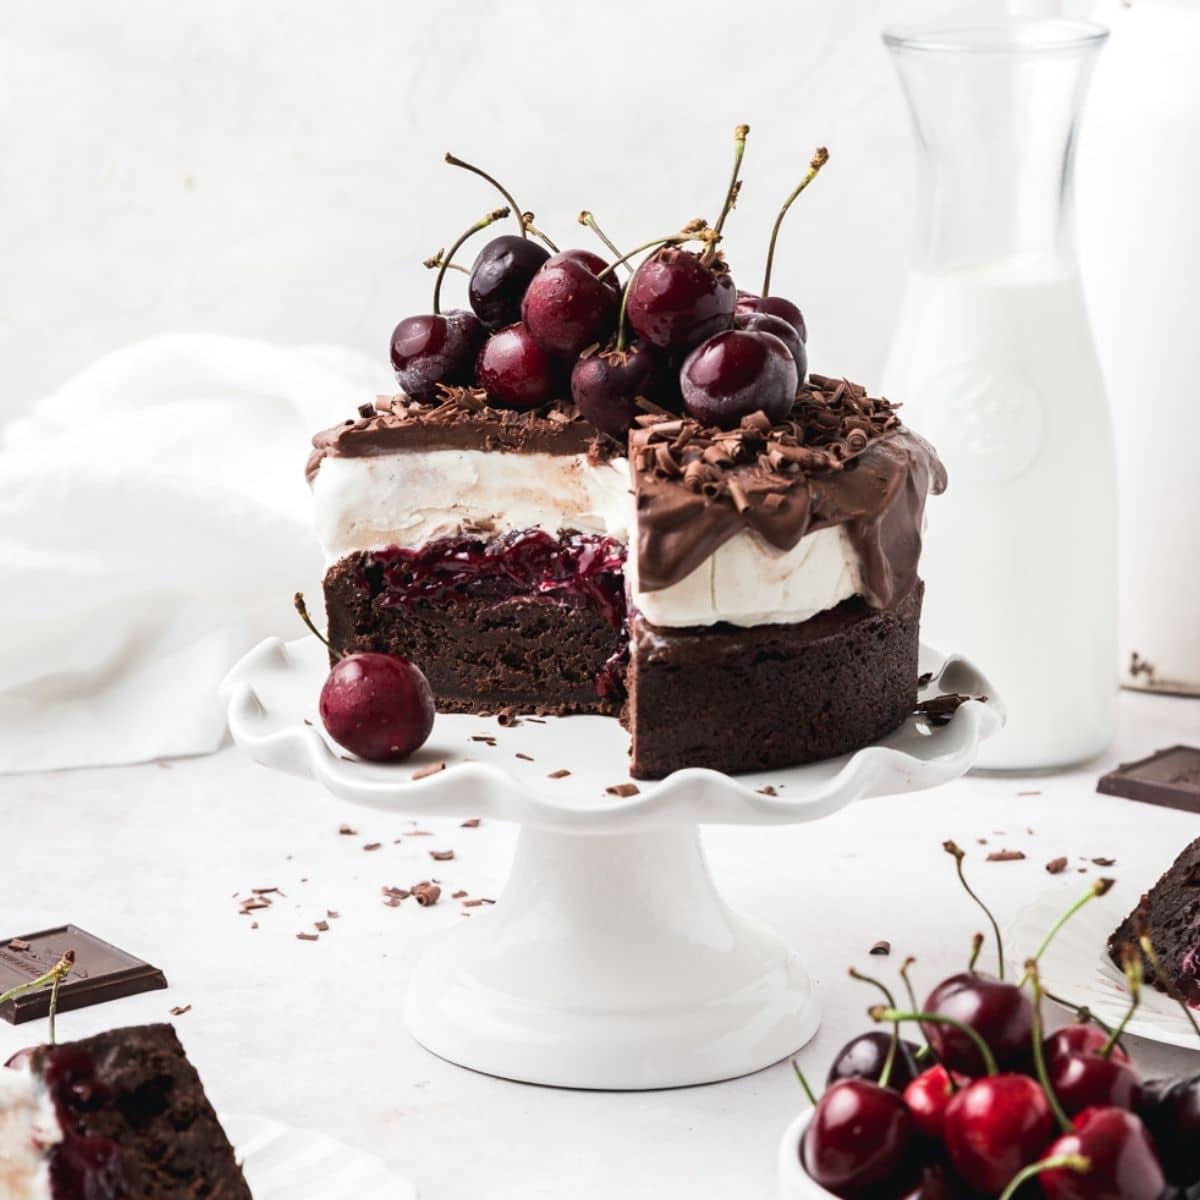 Do You Know The Story Behind The Black Forest Cake